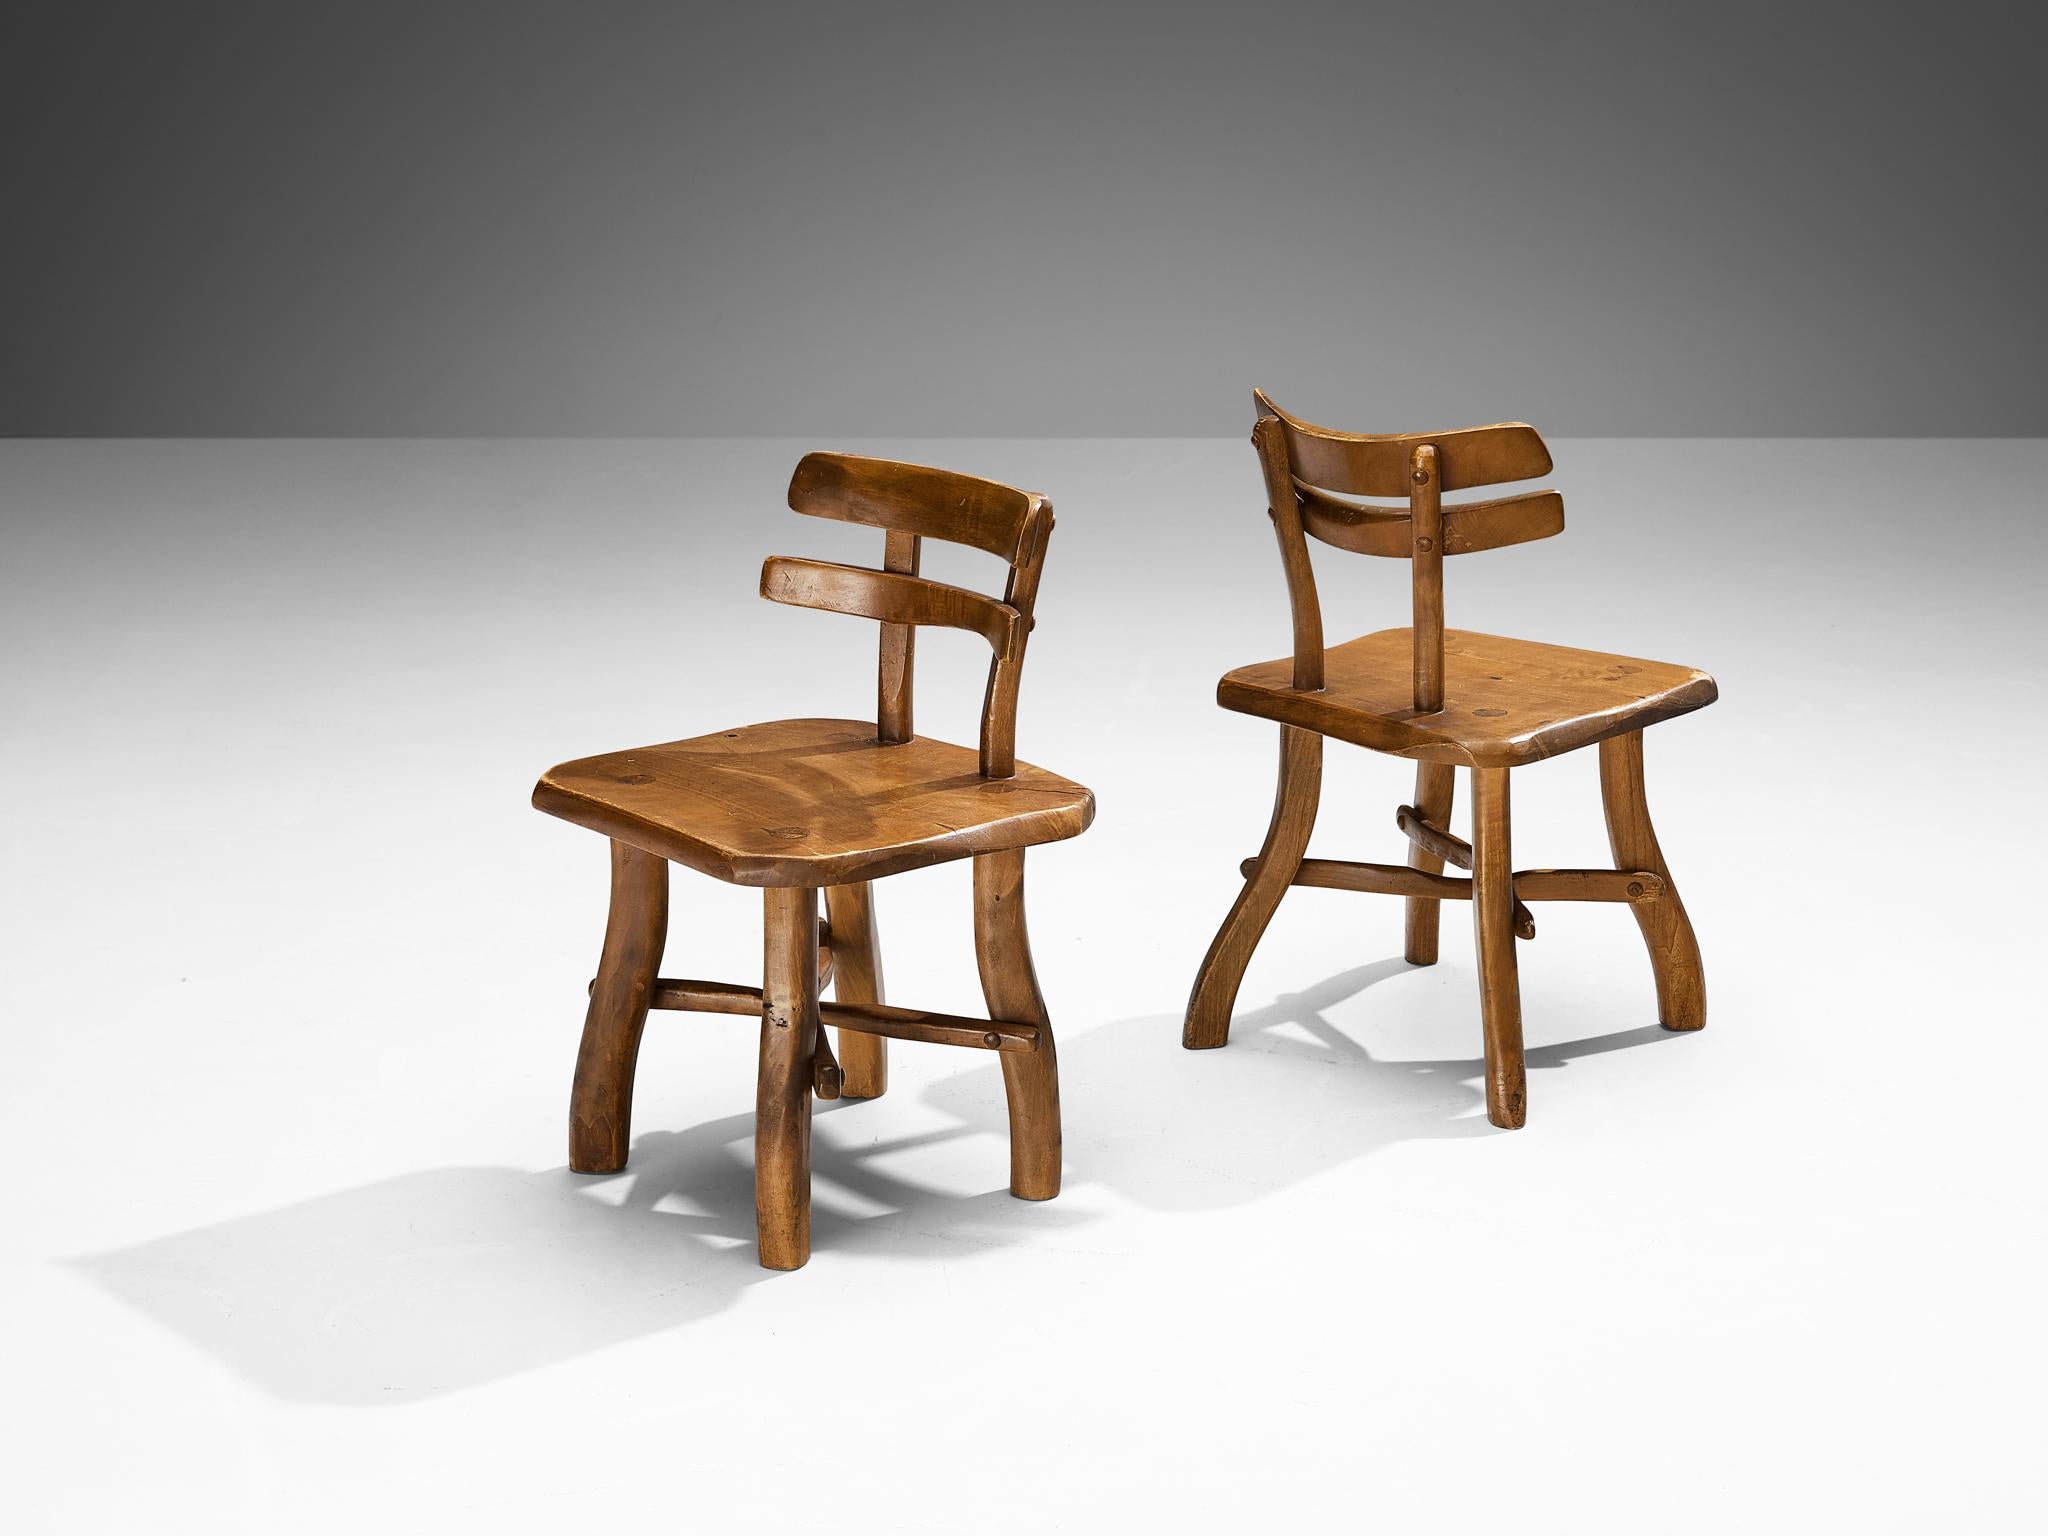 Brutalist chairs, maple, Europe 1960s 

Beautiful and naturalistic chairs made in Europe in the 1960s. These pieces have a strong decorative element, the double backrests of these pieces are the perfect combination of a brutalist character and